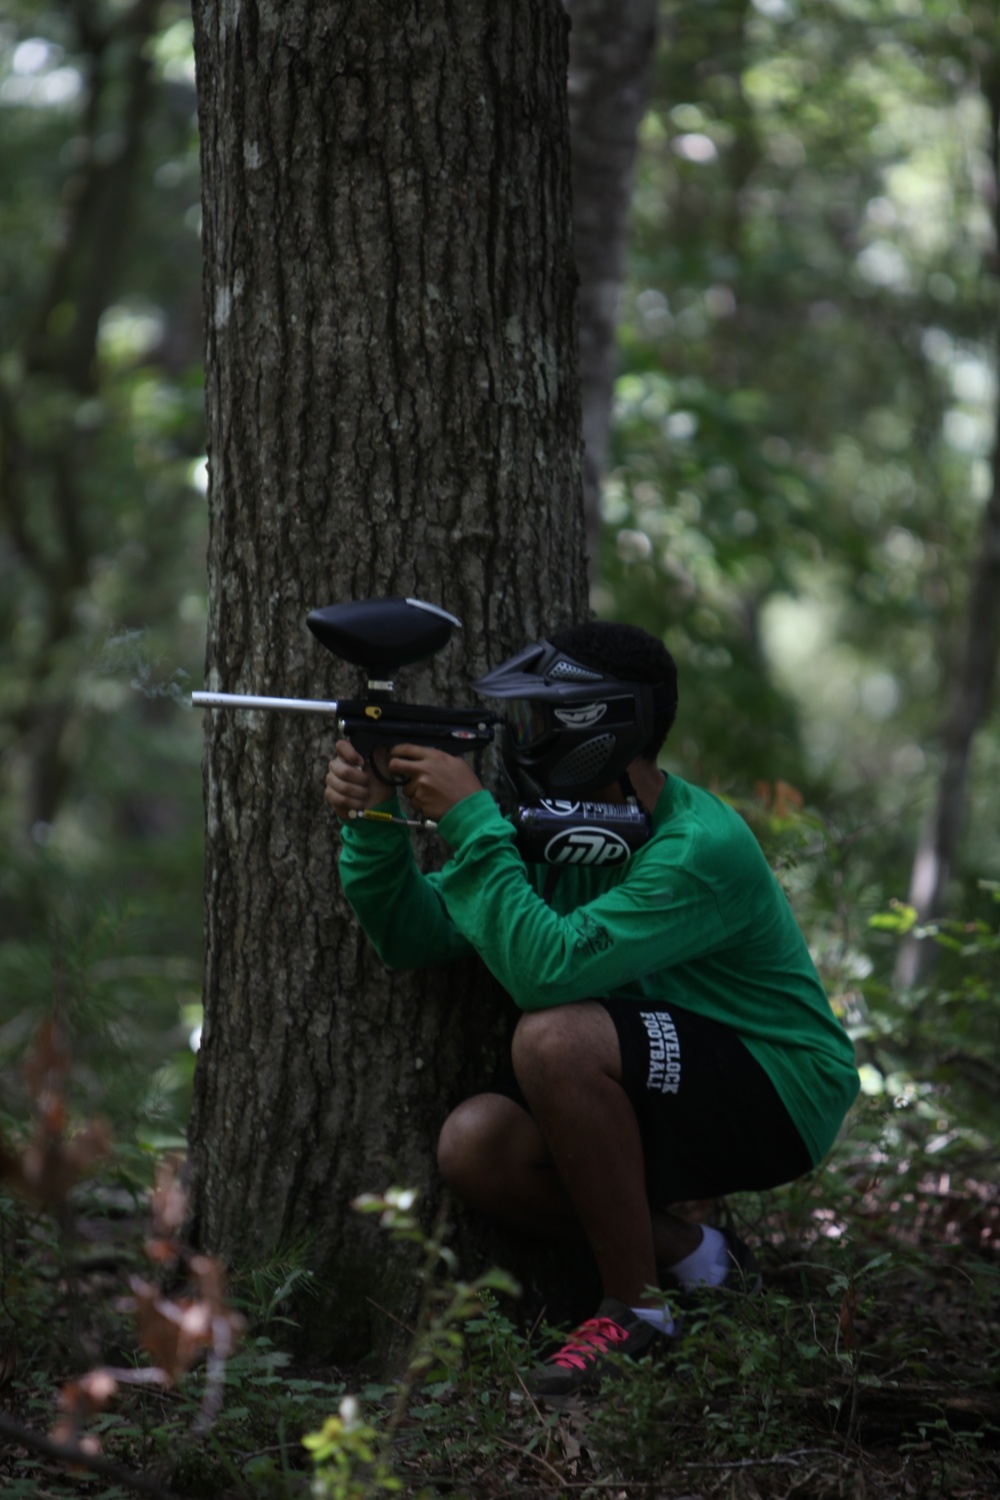 Marines, Sailors Face Off in Paintball Tournament